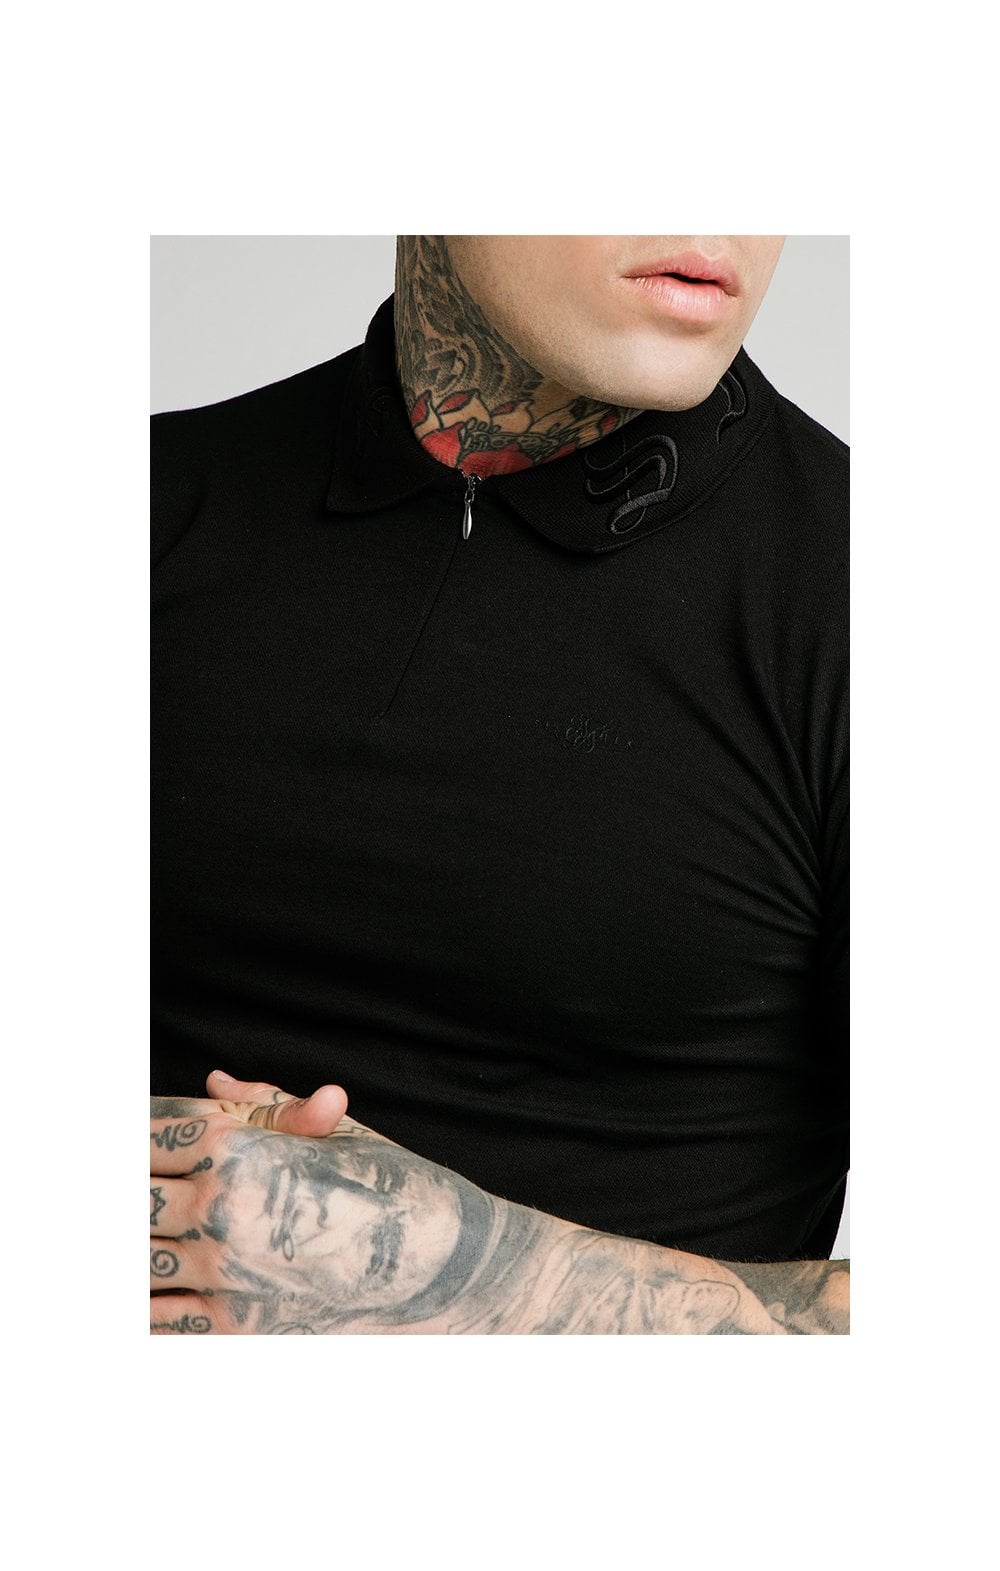 SikSilk S/S Old English Inset Cuff Polo - Black (1)